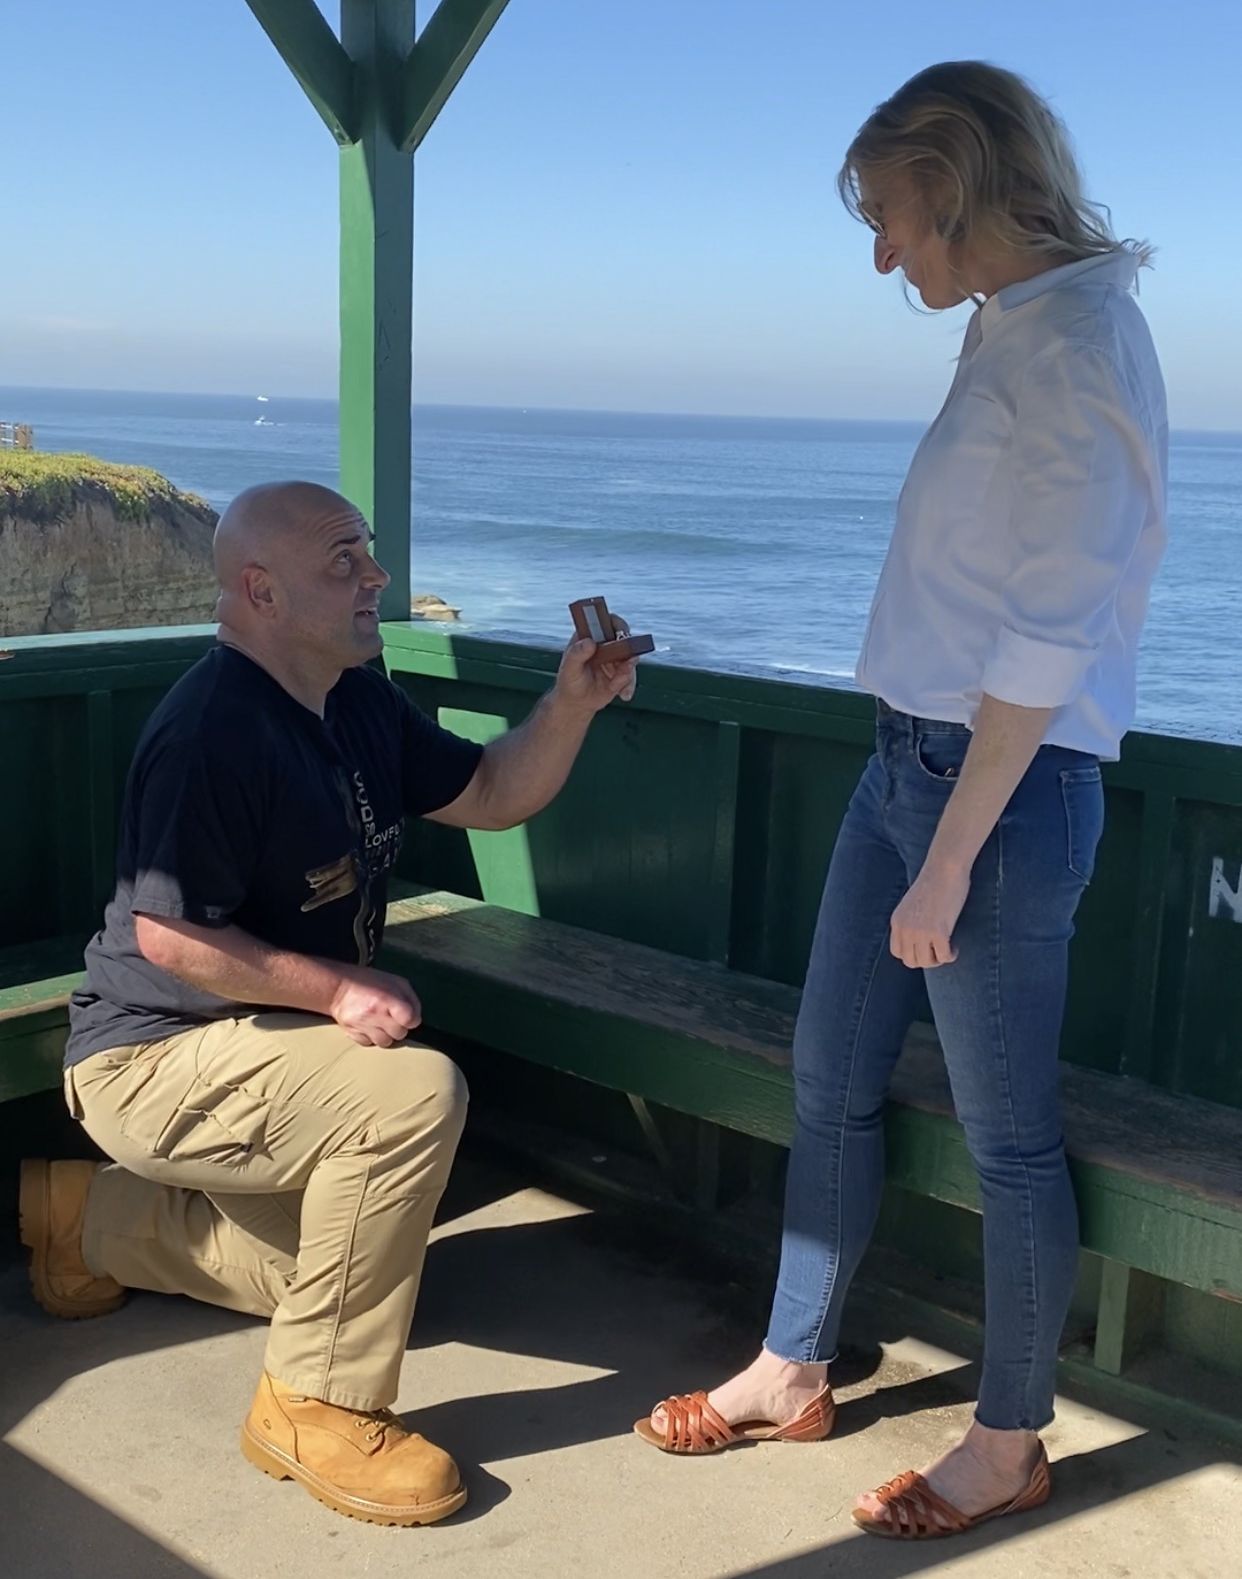 A Christian single man proposes to a blonde woman with the ocean in the background